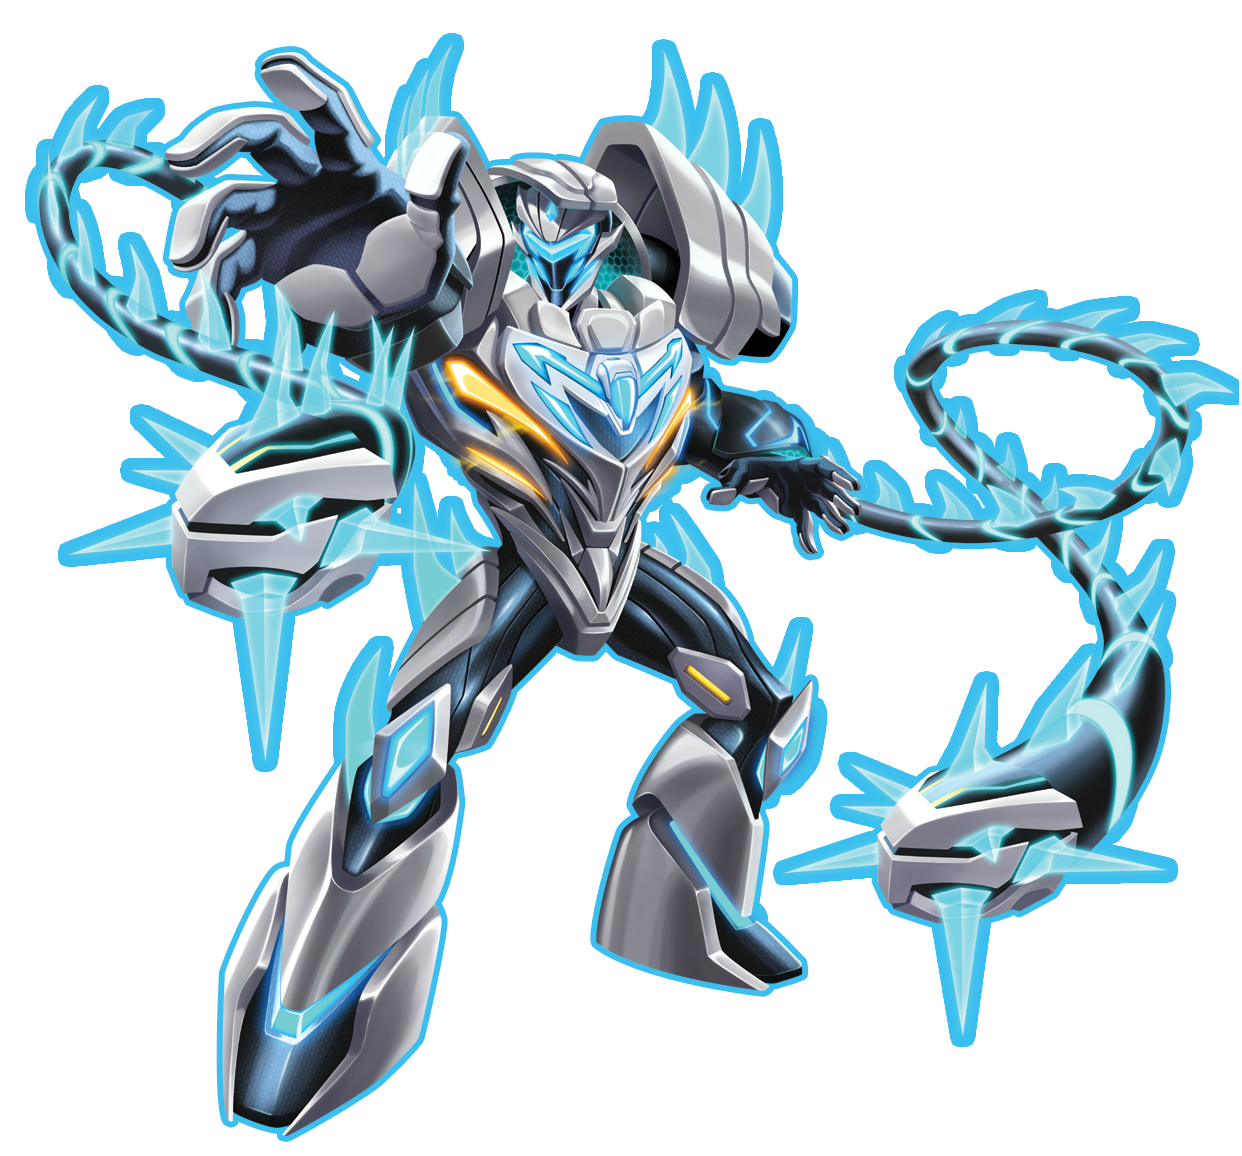 https://static.wikia.nocookie.net/max-steel-reboot/images/7/74/Spike_Cannon.png/revision/latest?cb=20160118040203